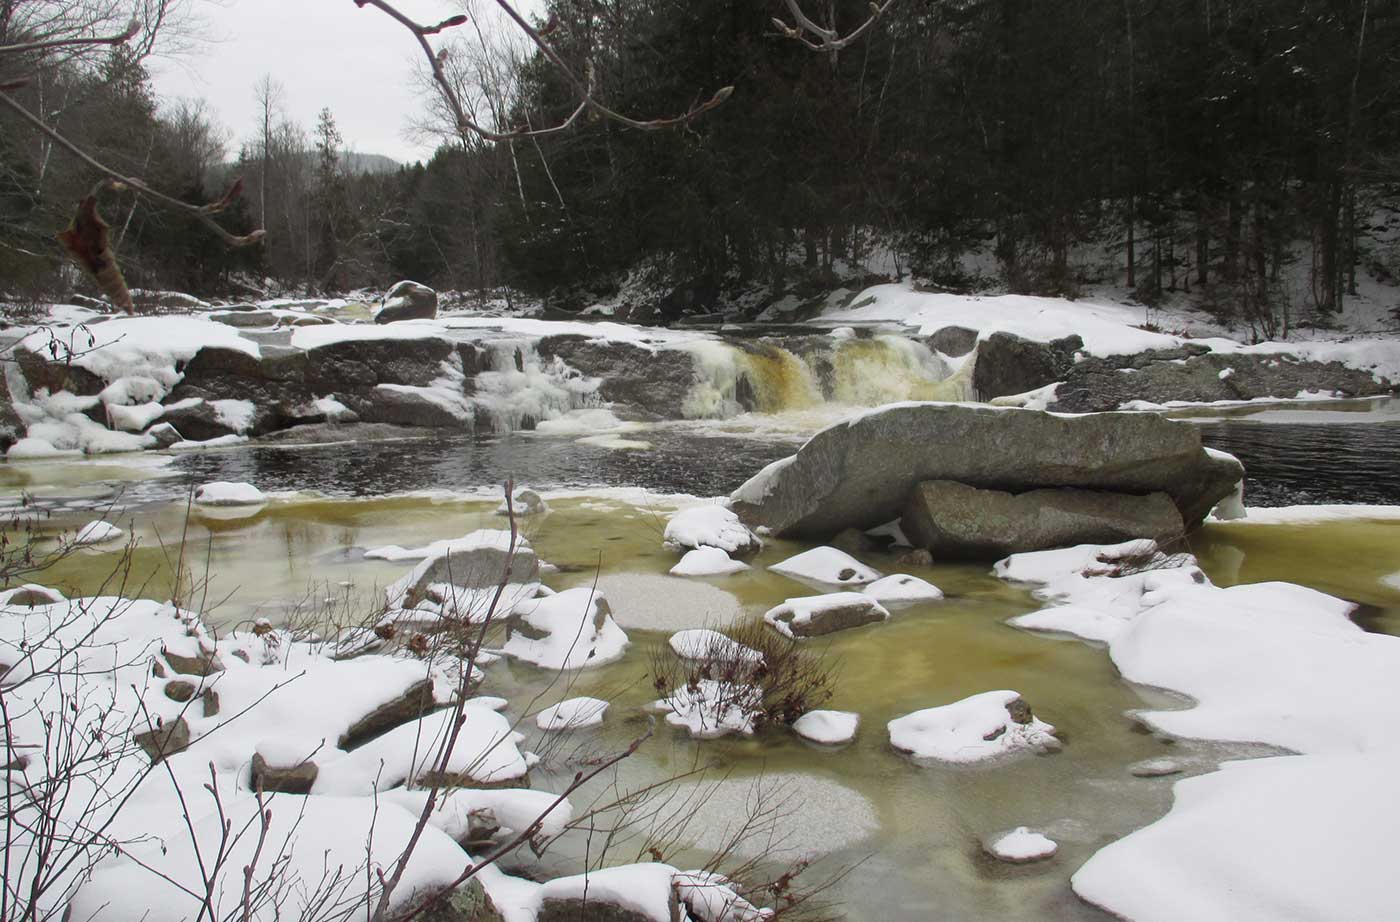 Stream flowing through trees with snow in stream